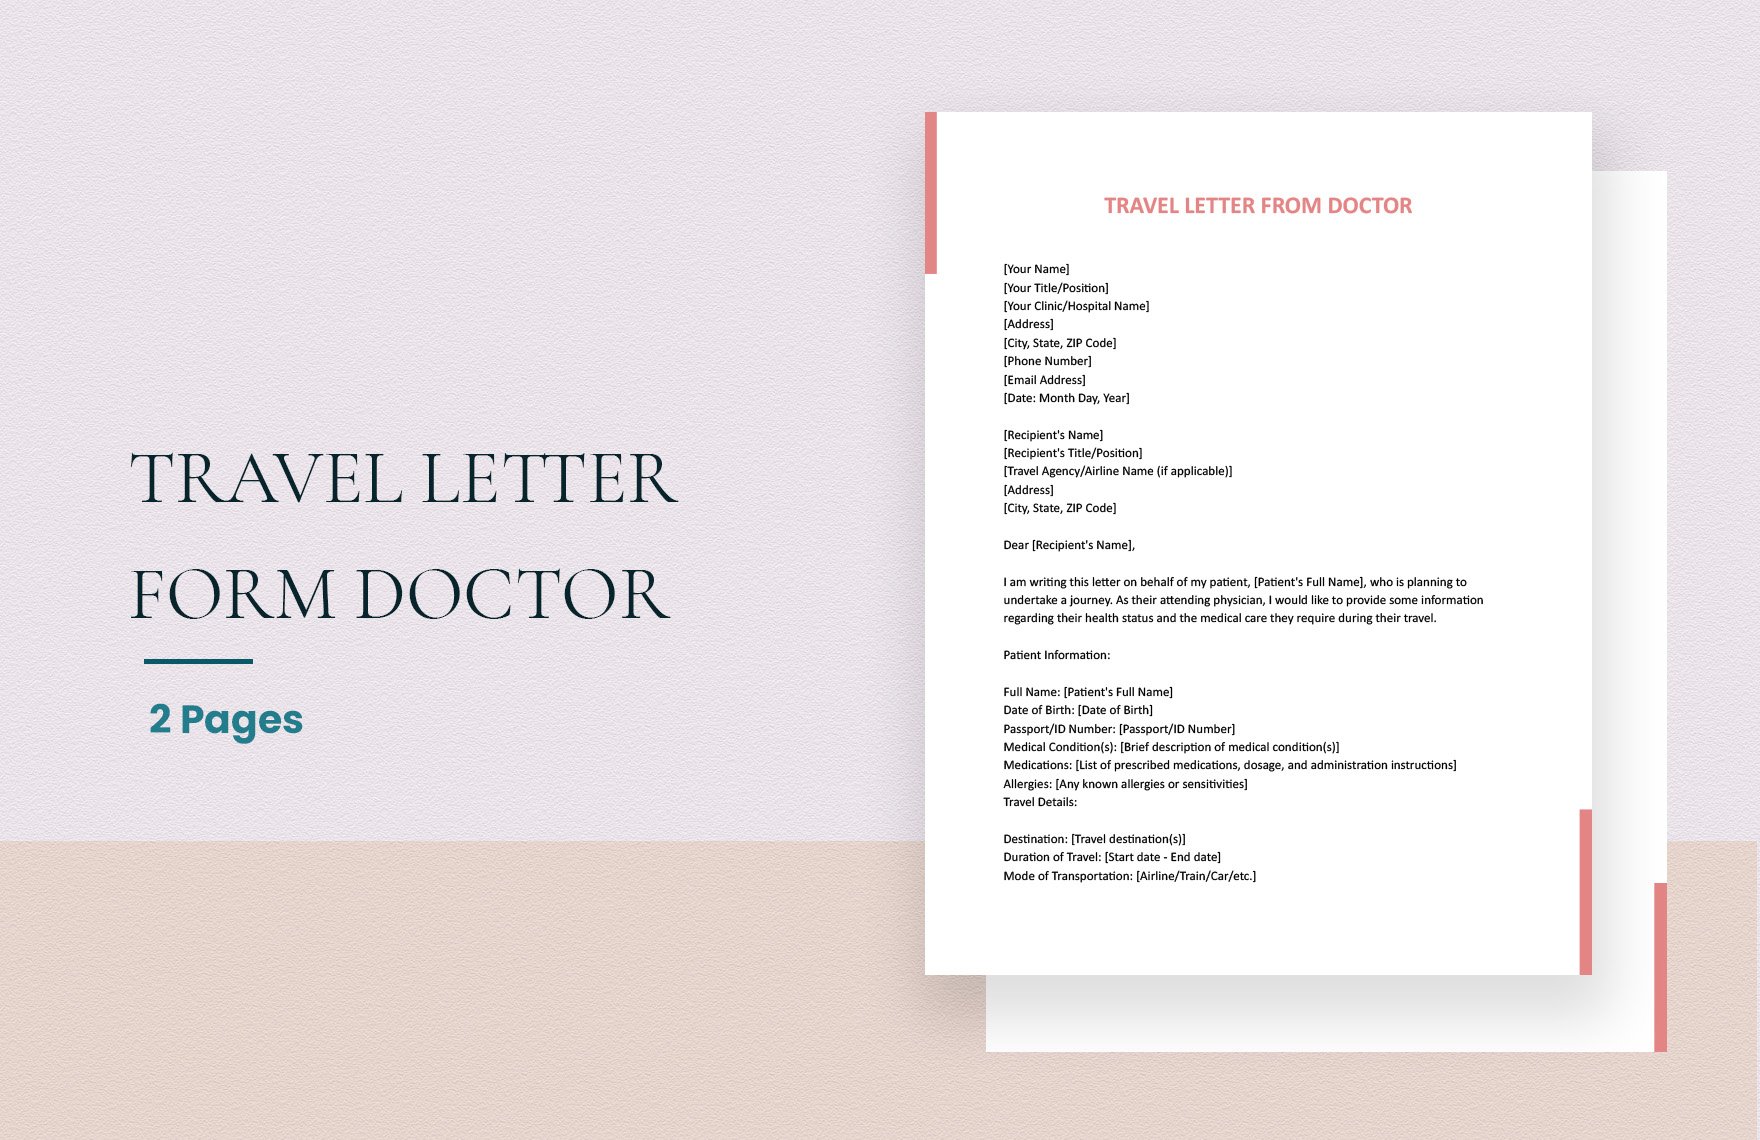 Travel Letter From Doctor